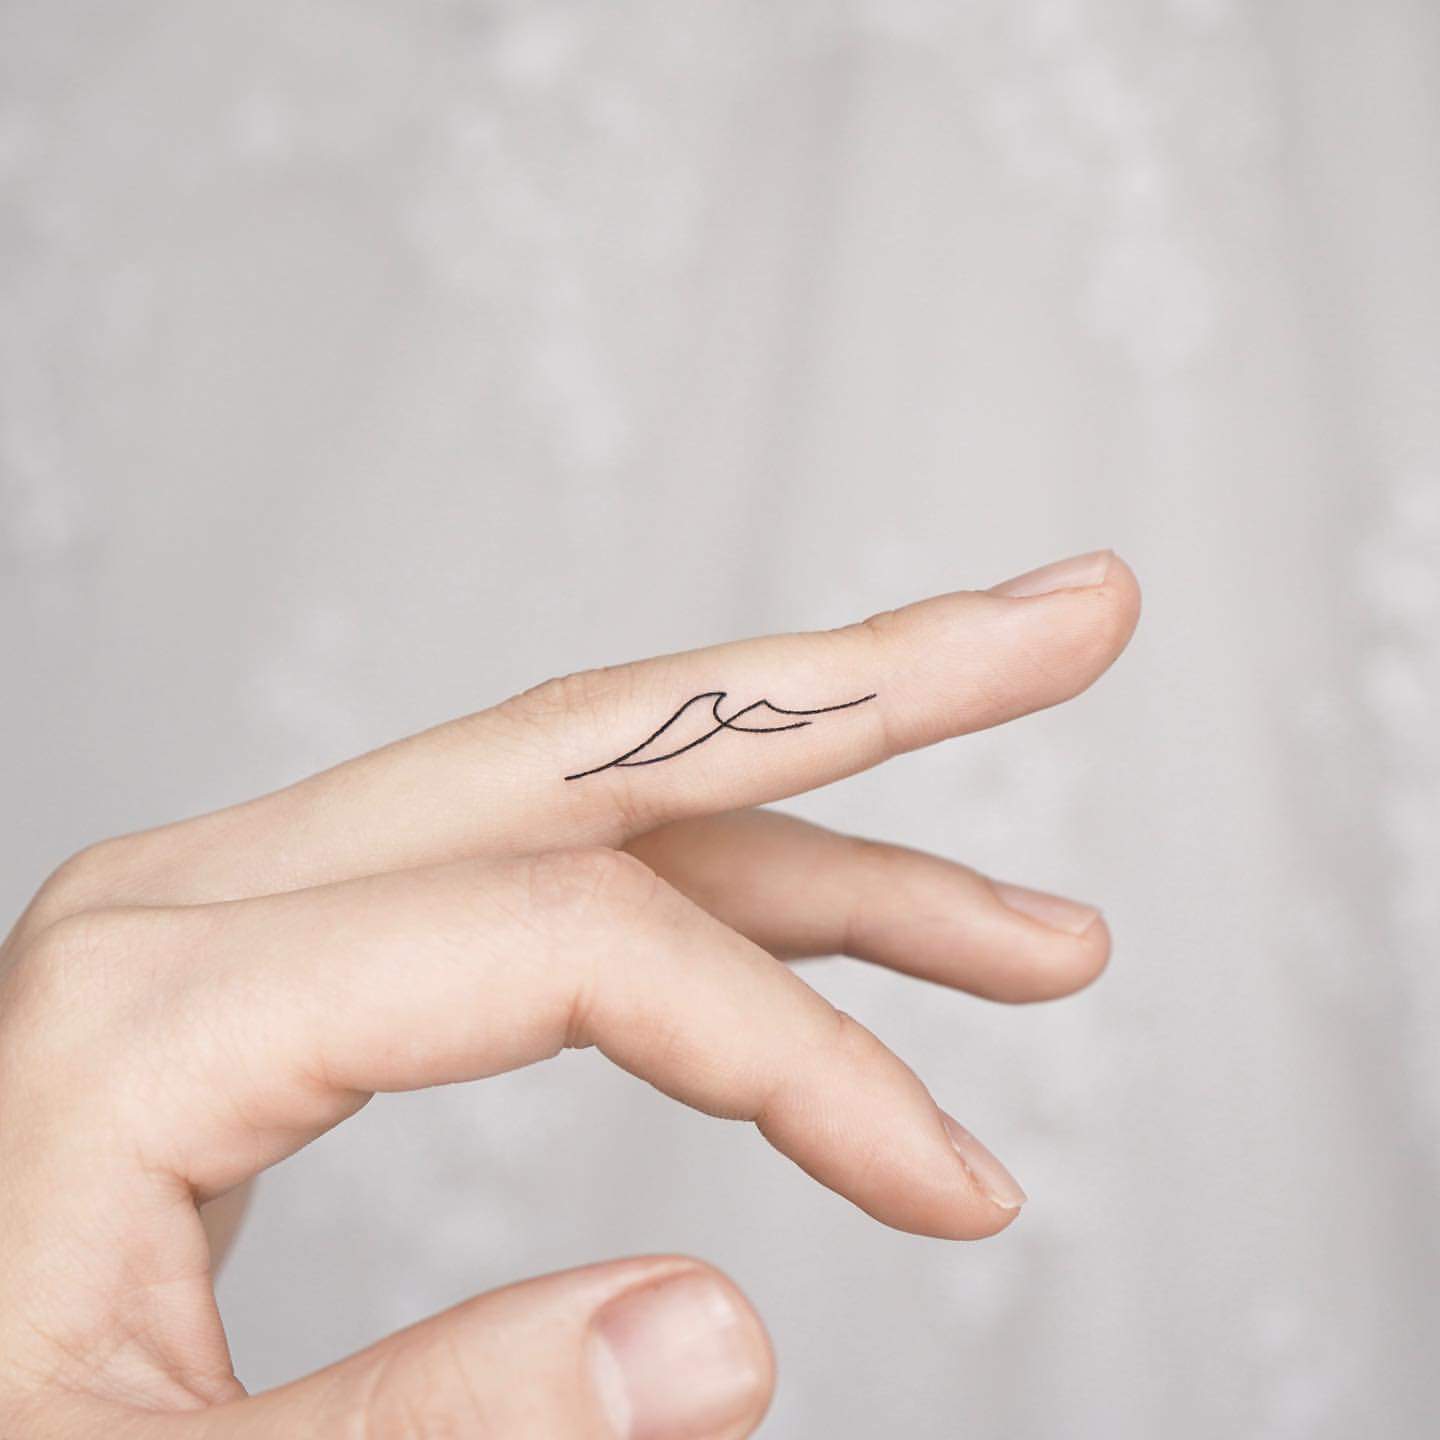 How To Keep Finger Tattoos From Fading The complete guide by Tiny Tattoo  Inc  Tiny Tattoo inc